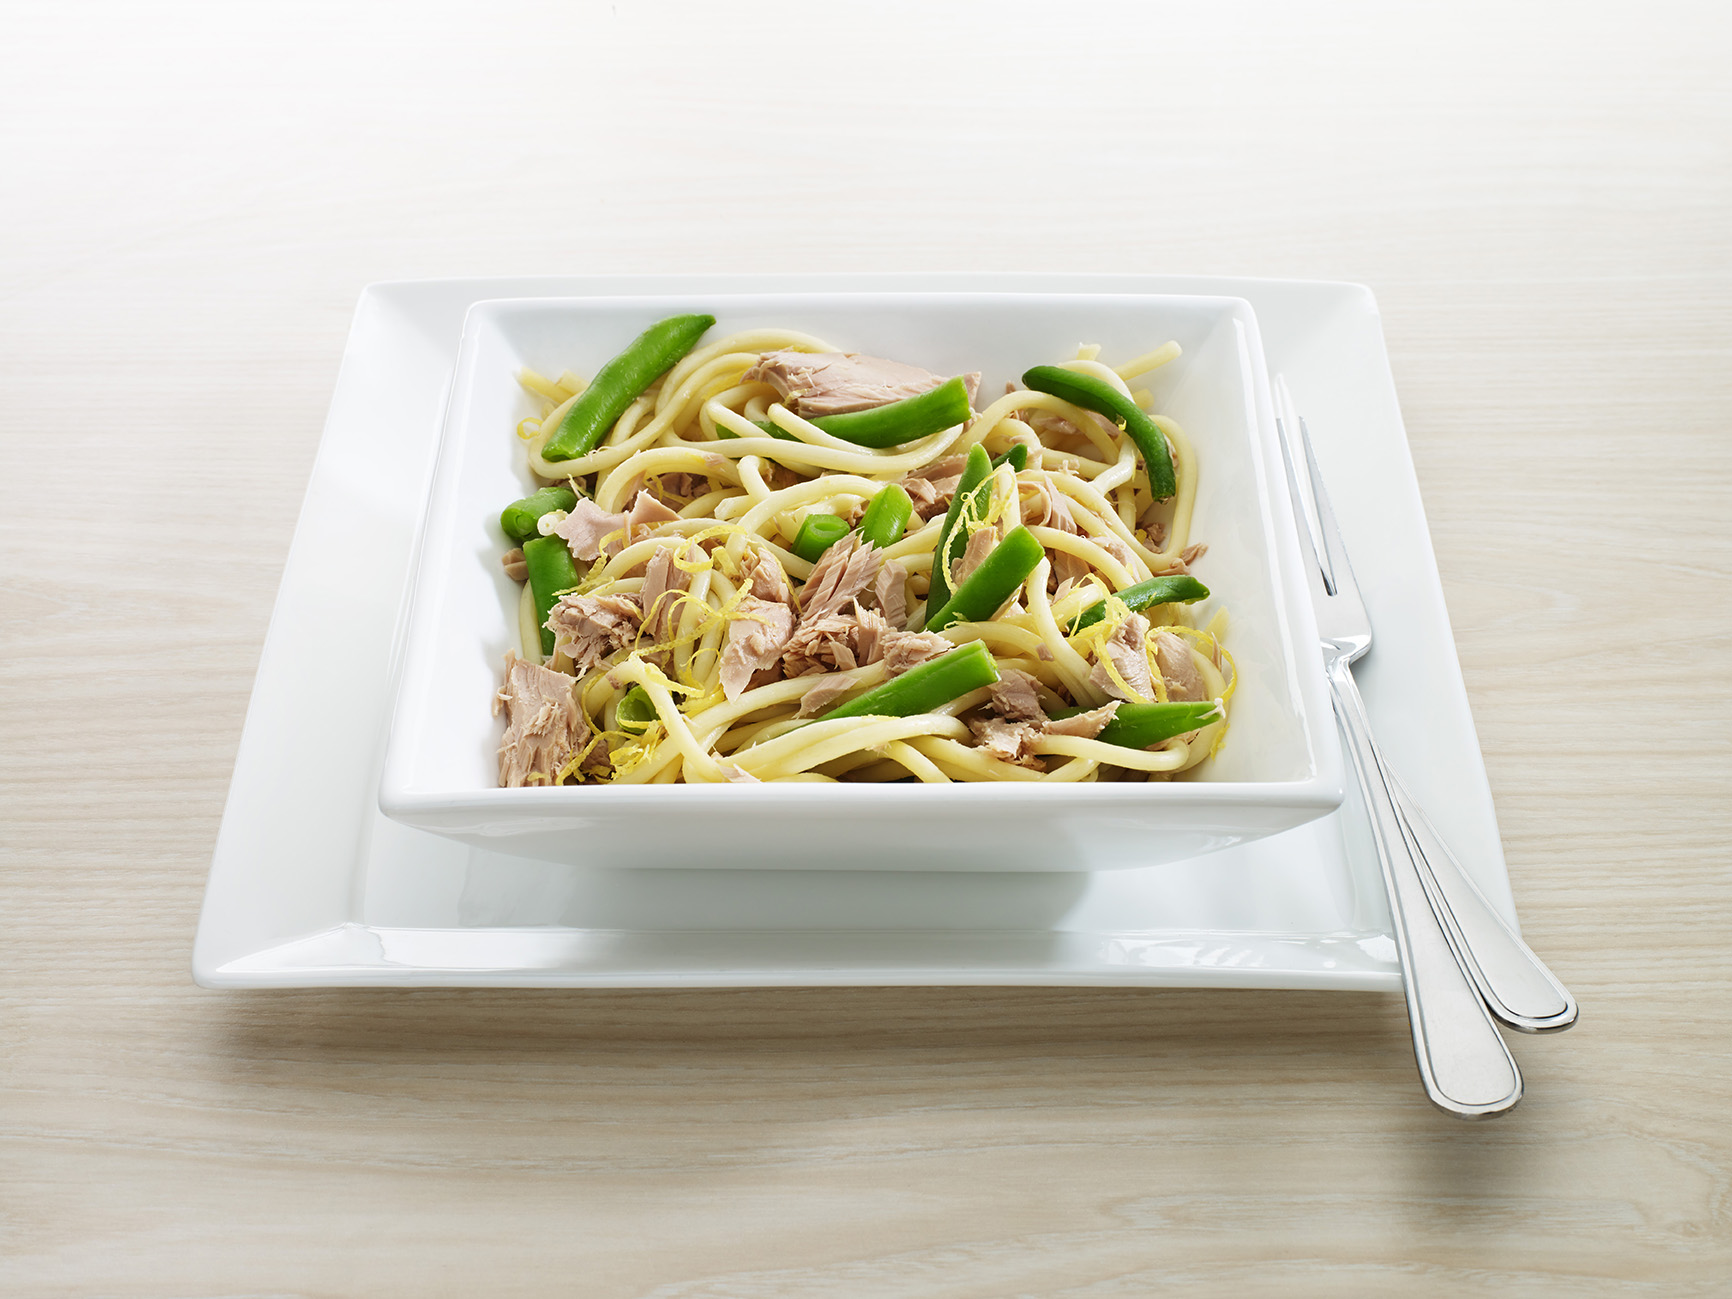 Spaghetti with tuna, cheese and green beans in a white bowl